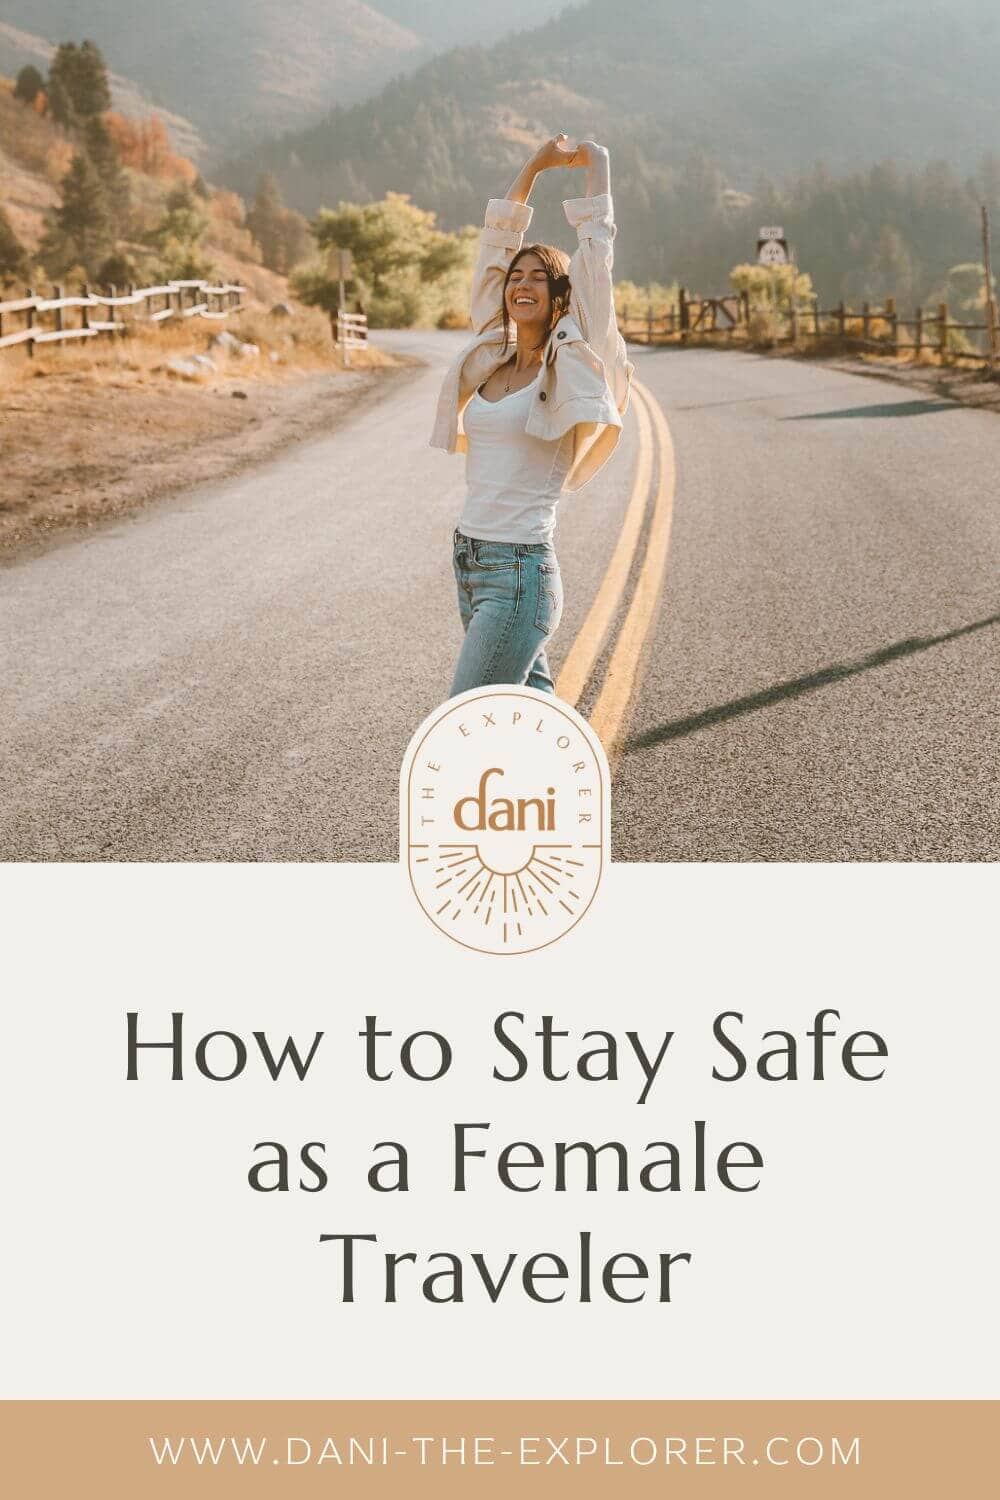 How to Stay Safe as a Female Traveler